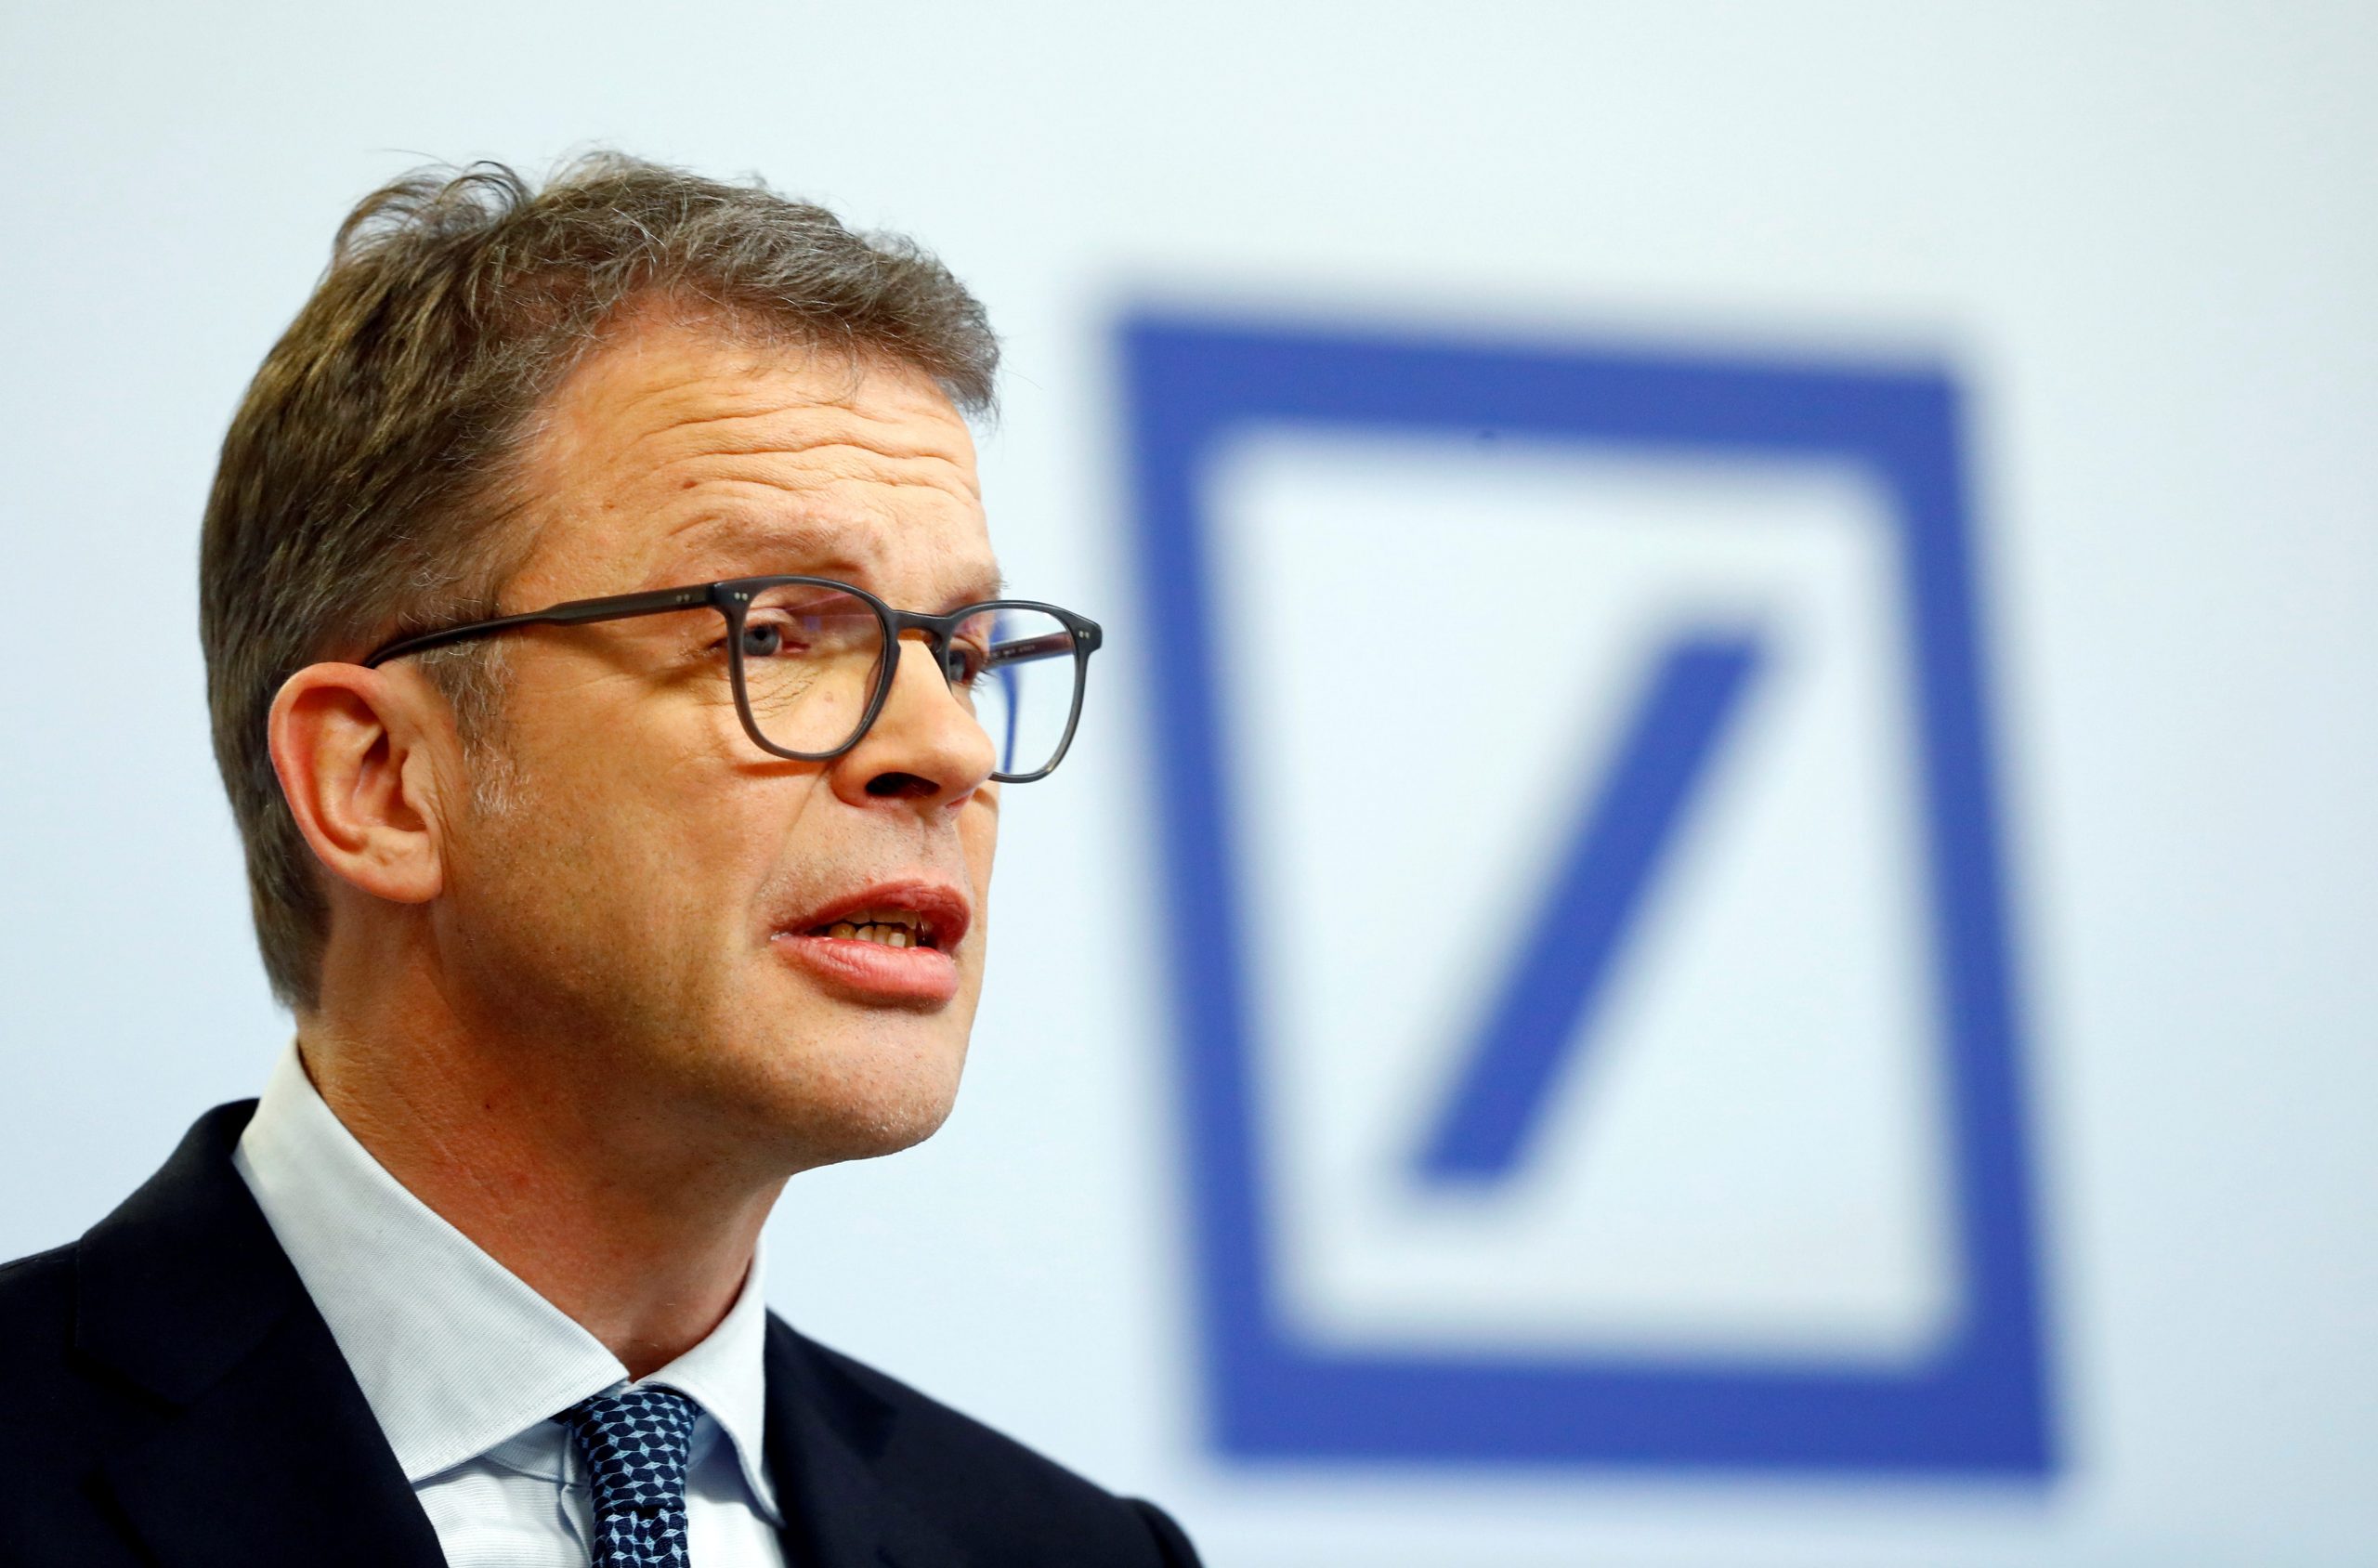 FILE PHOTO: Deutsche Bank CEO Christian Sewing speaks during the bank's annual news conference in Frankfurt, Germany, January 30, 2020. REUTERS/Ralph Orlowski